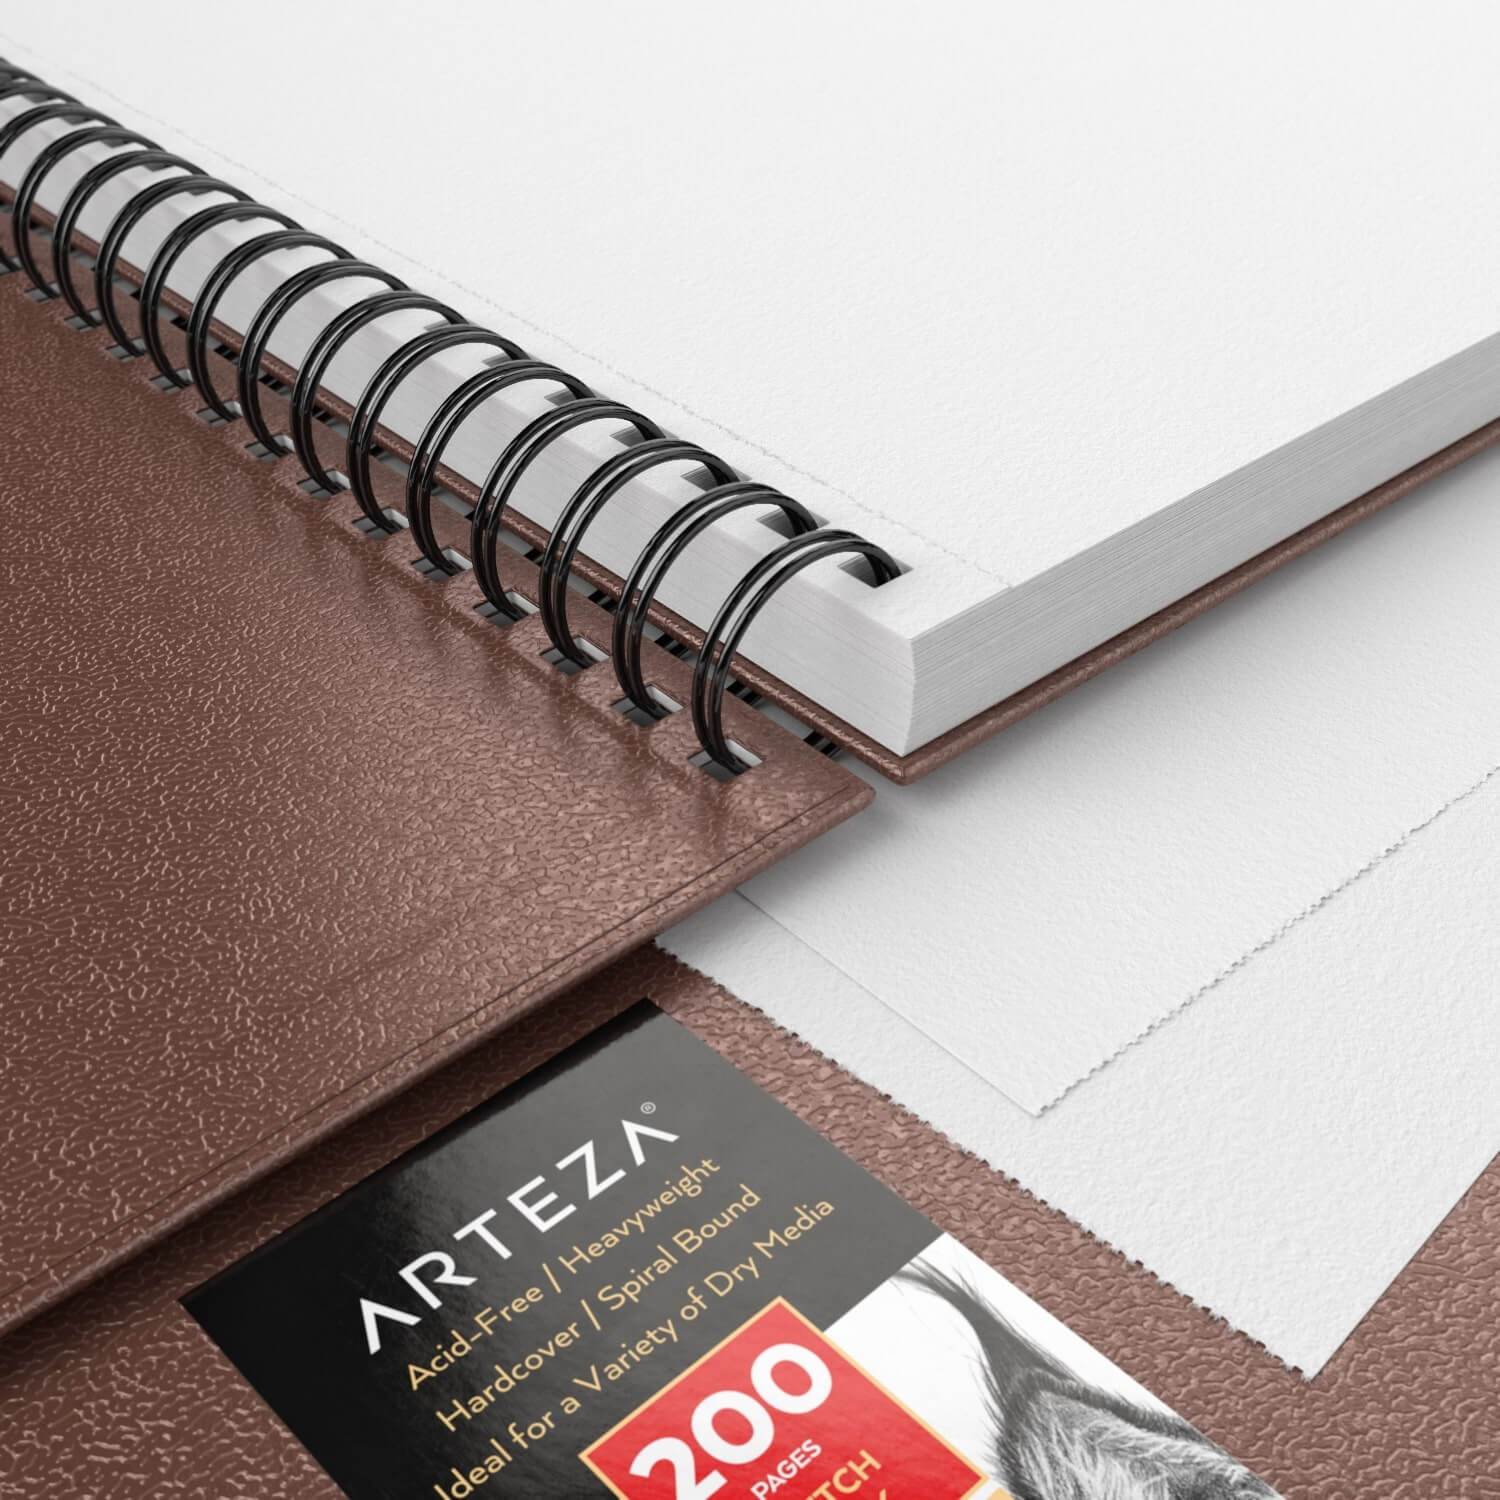  ARTEZA Mixed Media Sketchbooks, Pack of 2, 9 x 12 Inches,  60-Sheet Drawing Pads, 110lb/180gsm Acid-Free Paper, Micro-Perforated,  Spiral-Bound, Art Supplies for Wet and Dry Media,White : Arts, Crafts &  Sewing